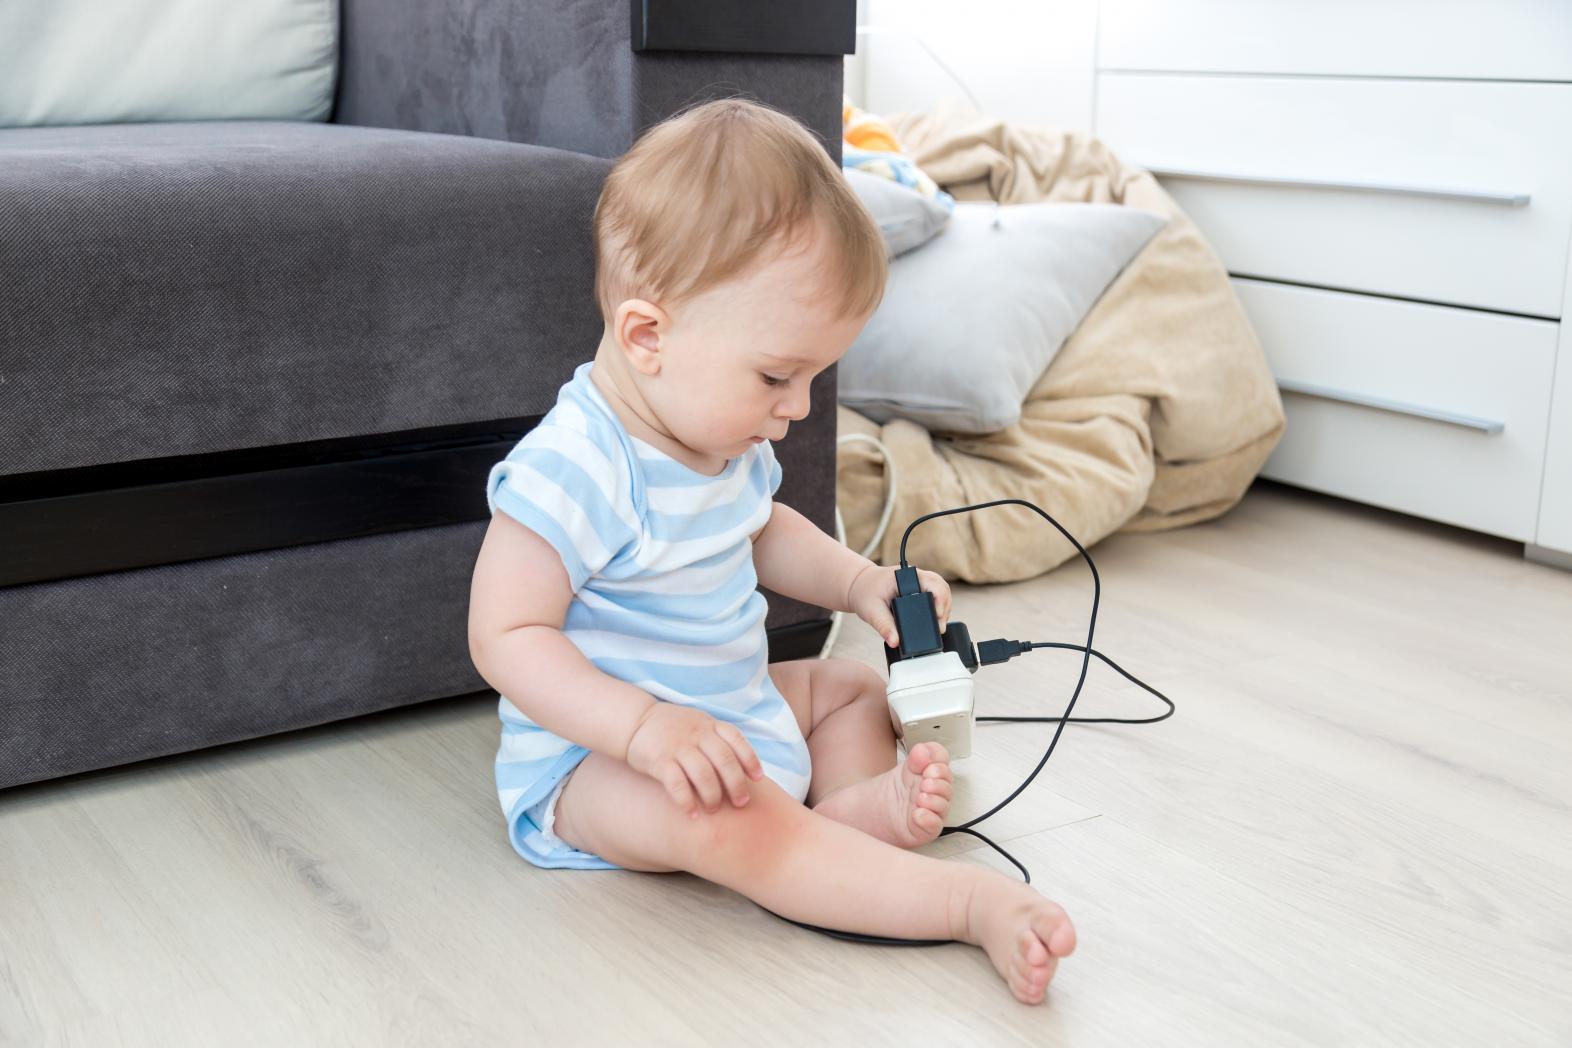 Child playing with a surge protector with multiple cords plugged into it